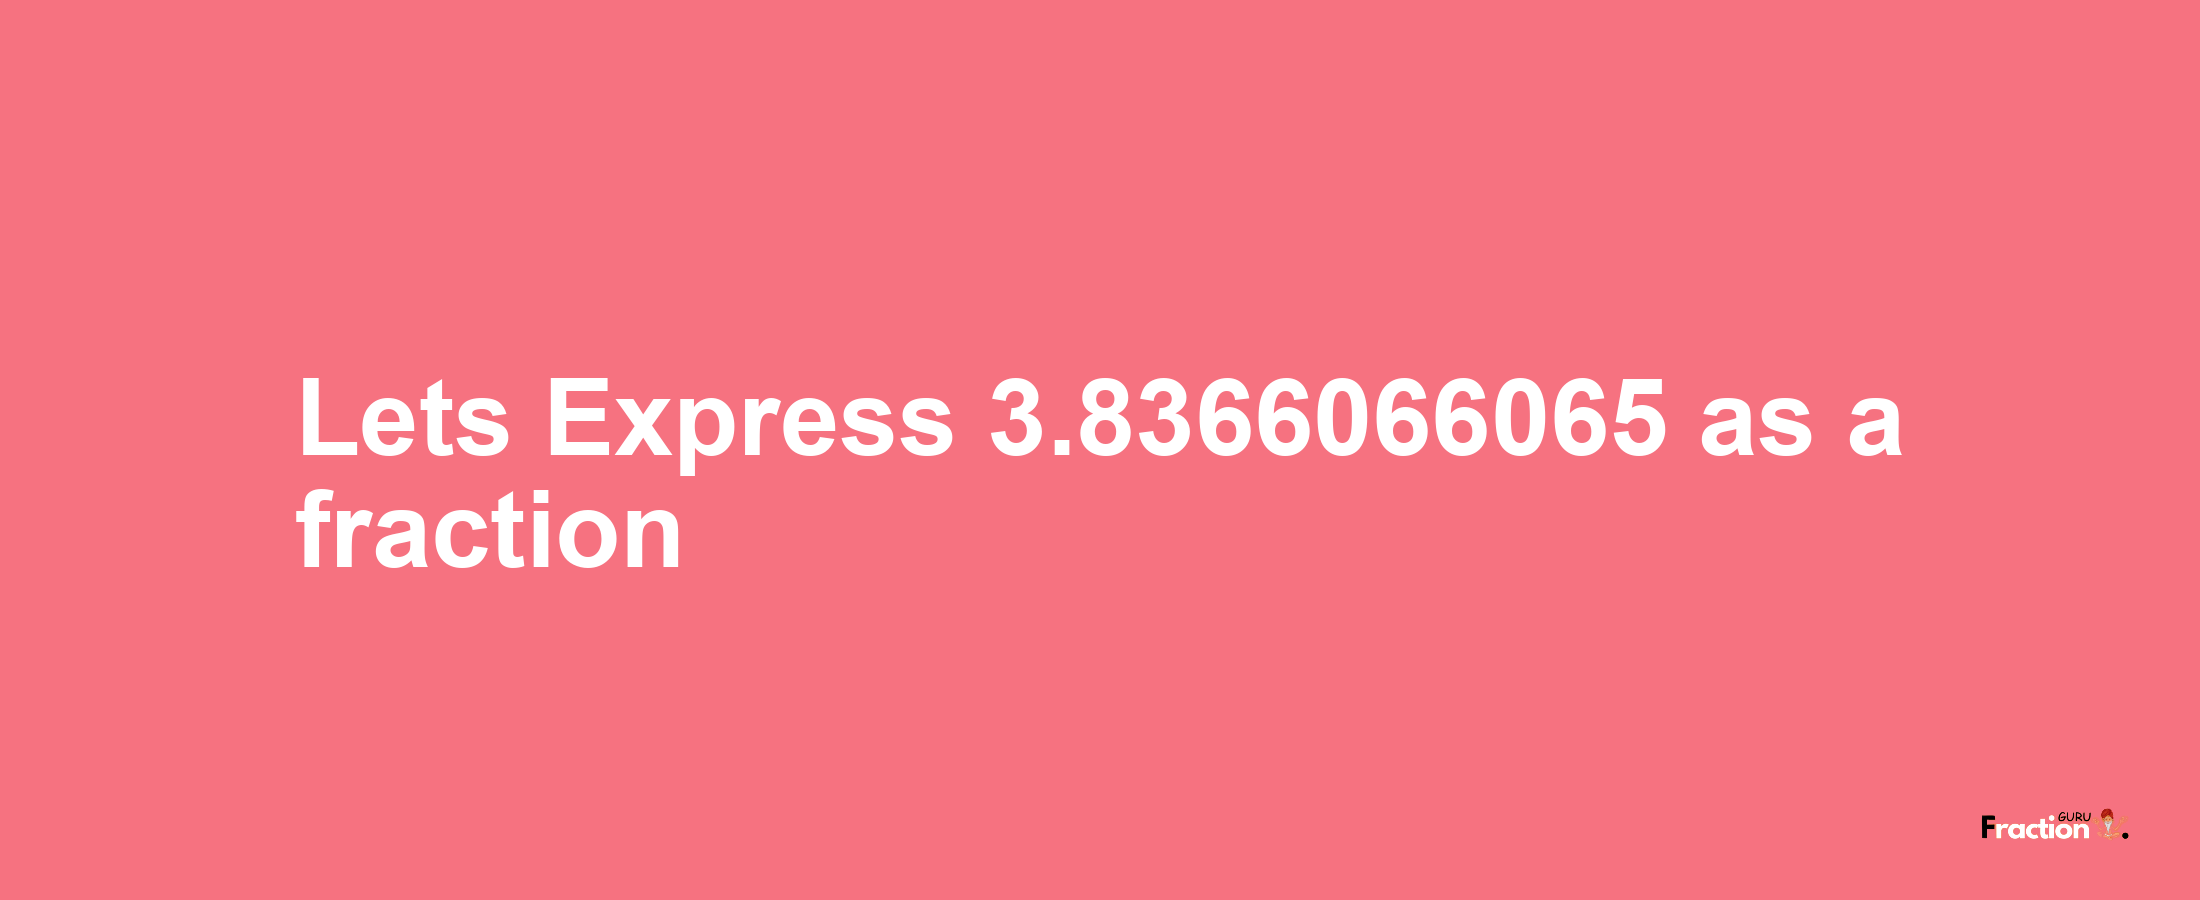 Lets Express 3.8366066065 as afraction